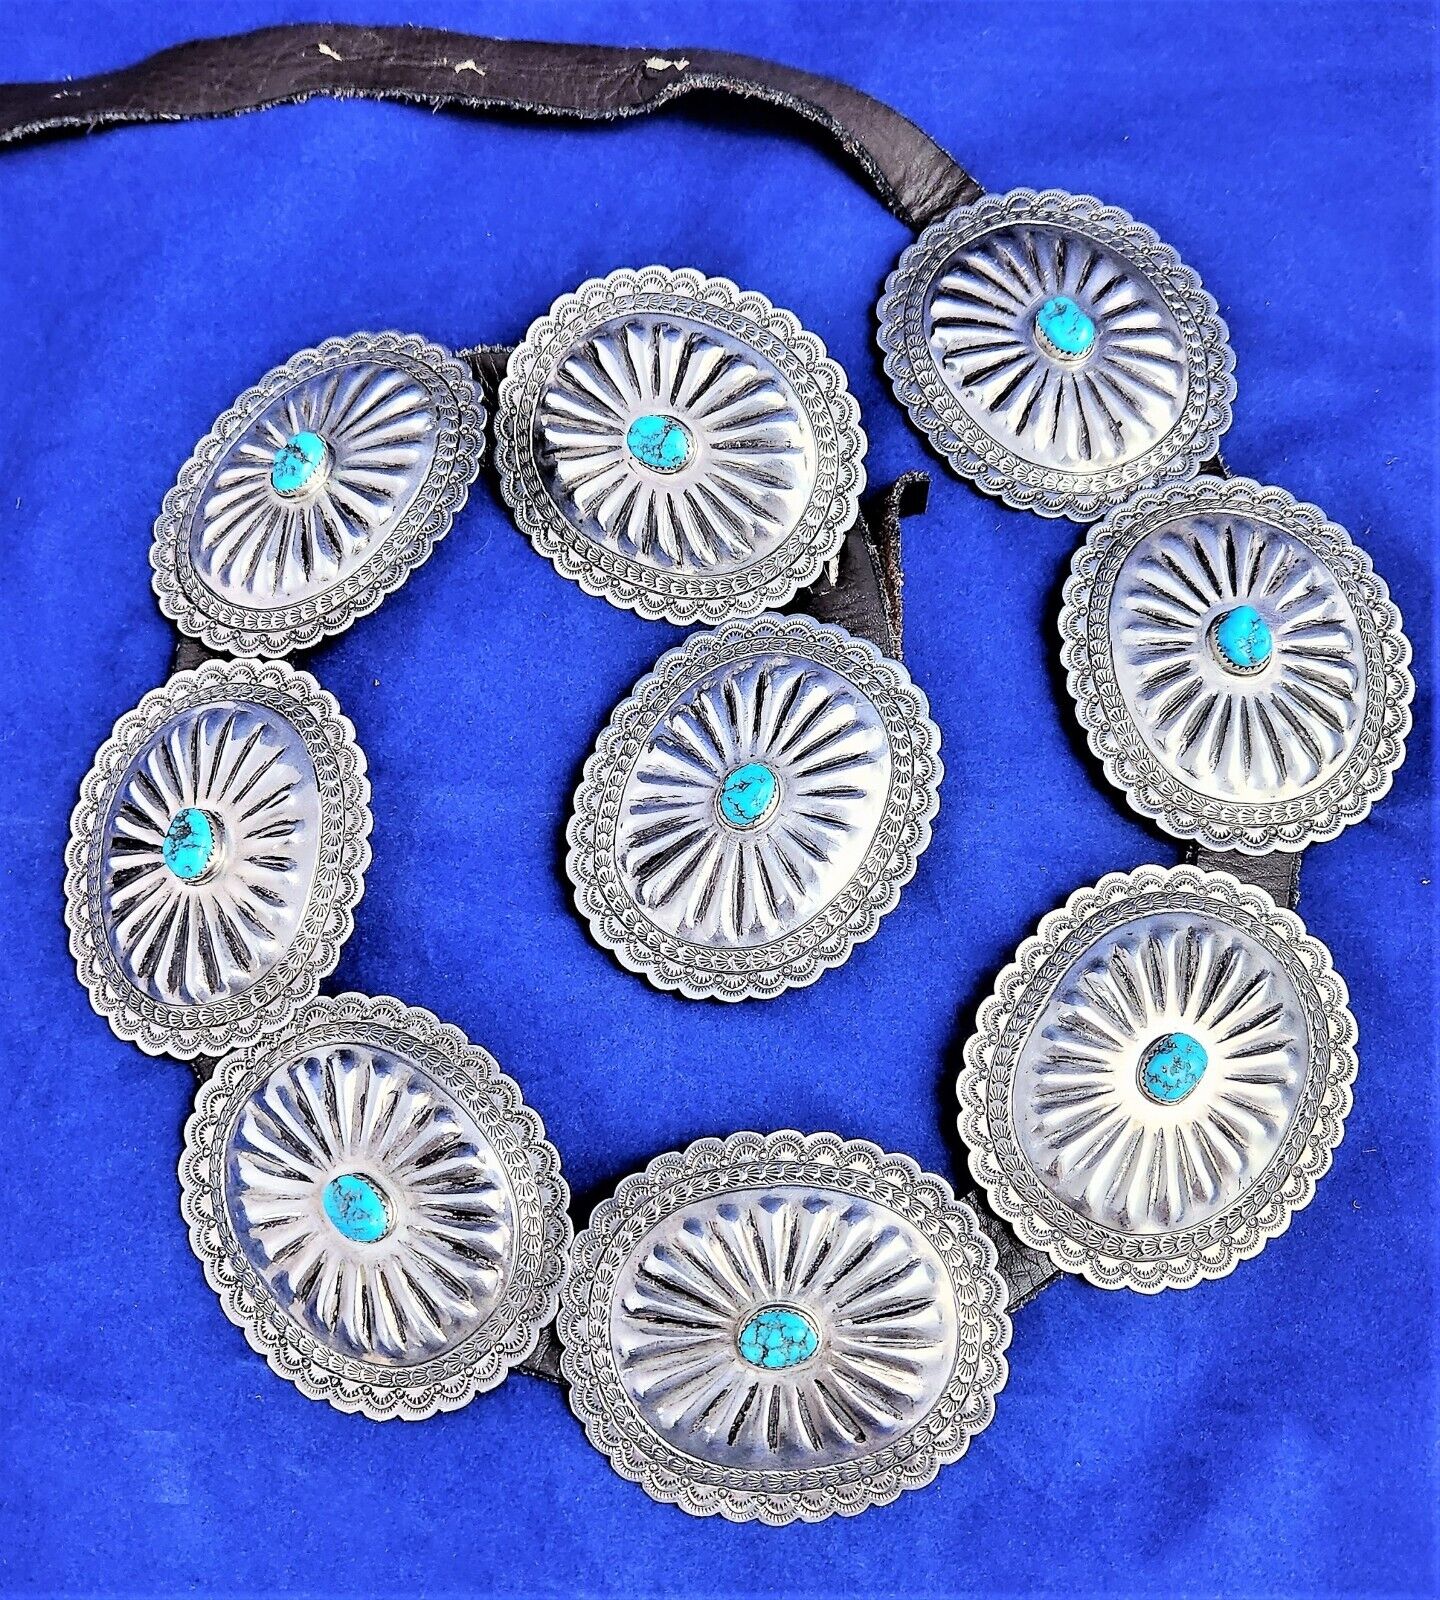 Vintage Navajo Tony Guerro Bisbee Turquoise Nugget Sterling Silver Concho Belt 